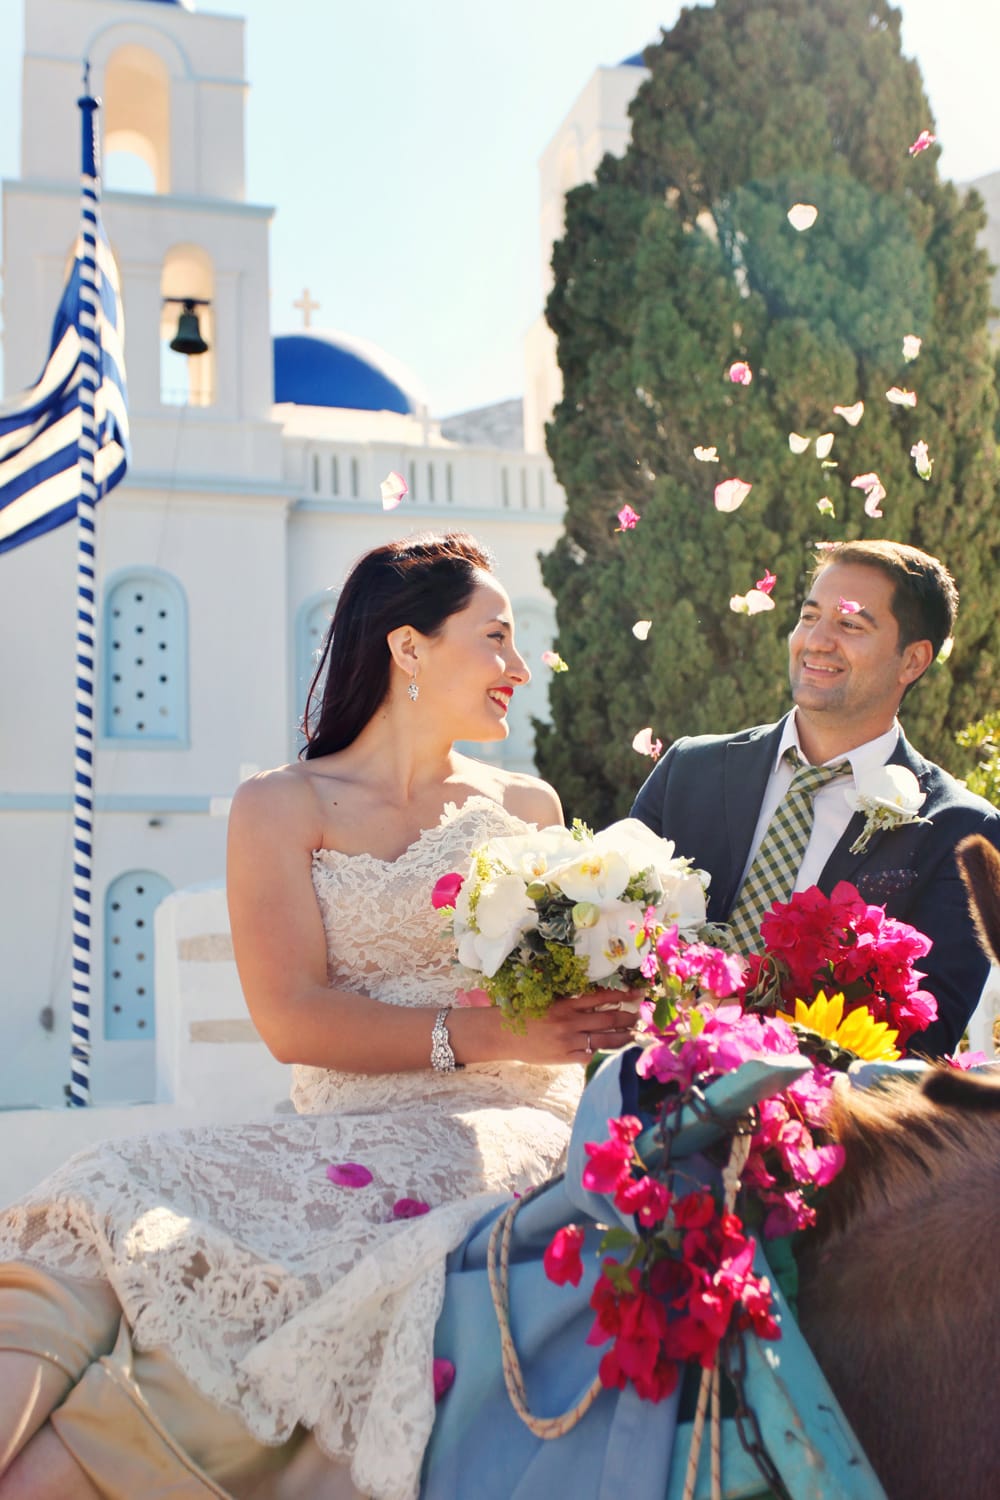 Eventive Wedding Planner Athens & Amorgos, Greece | Member of Weddings Abroad Guide Supplier Directory